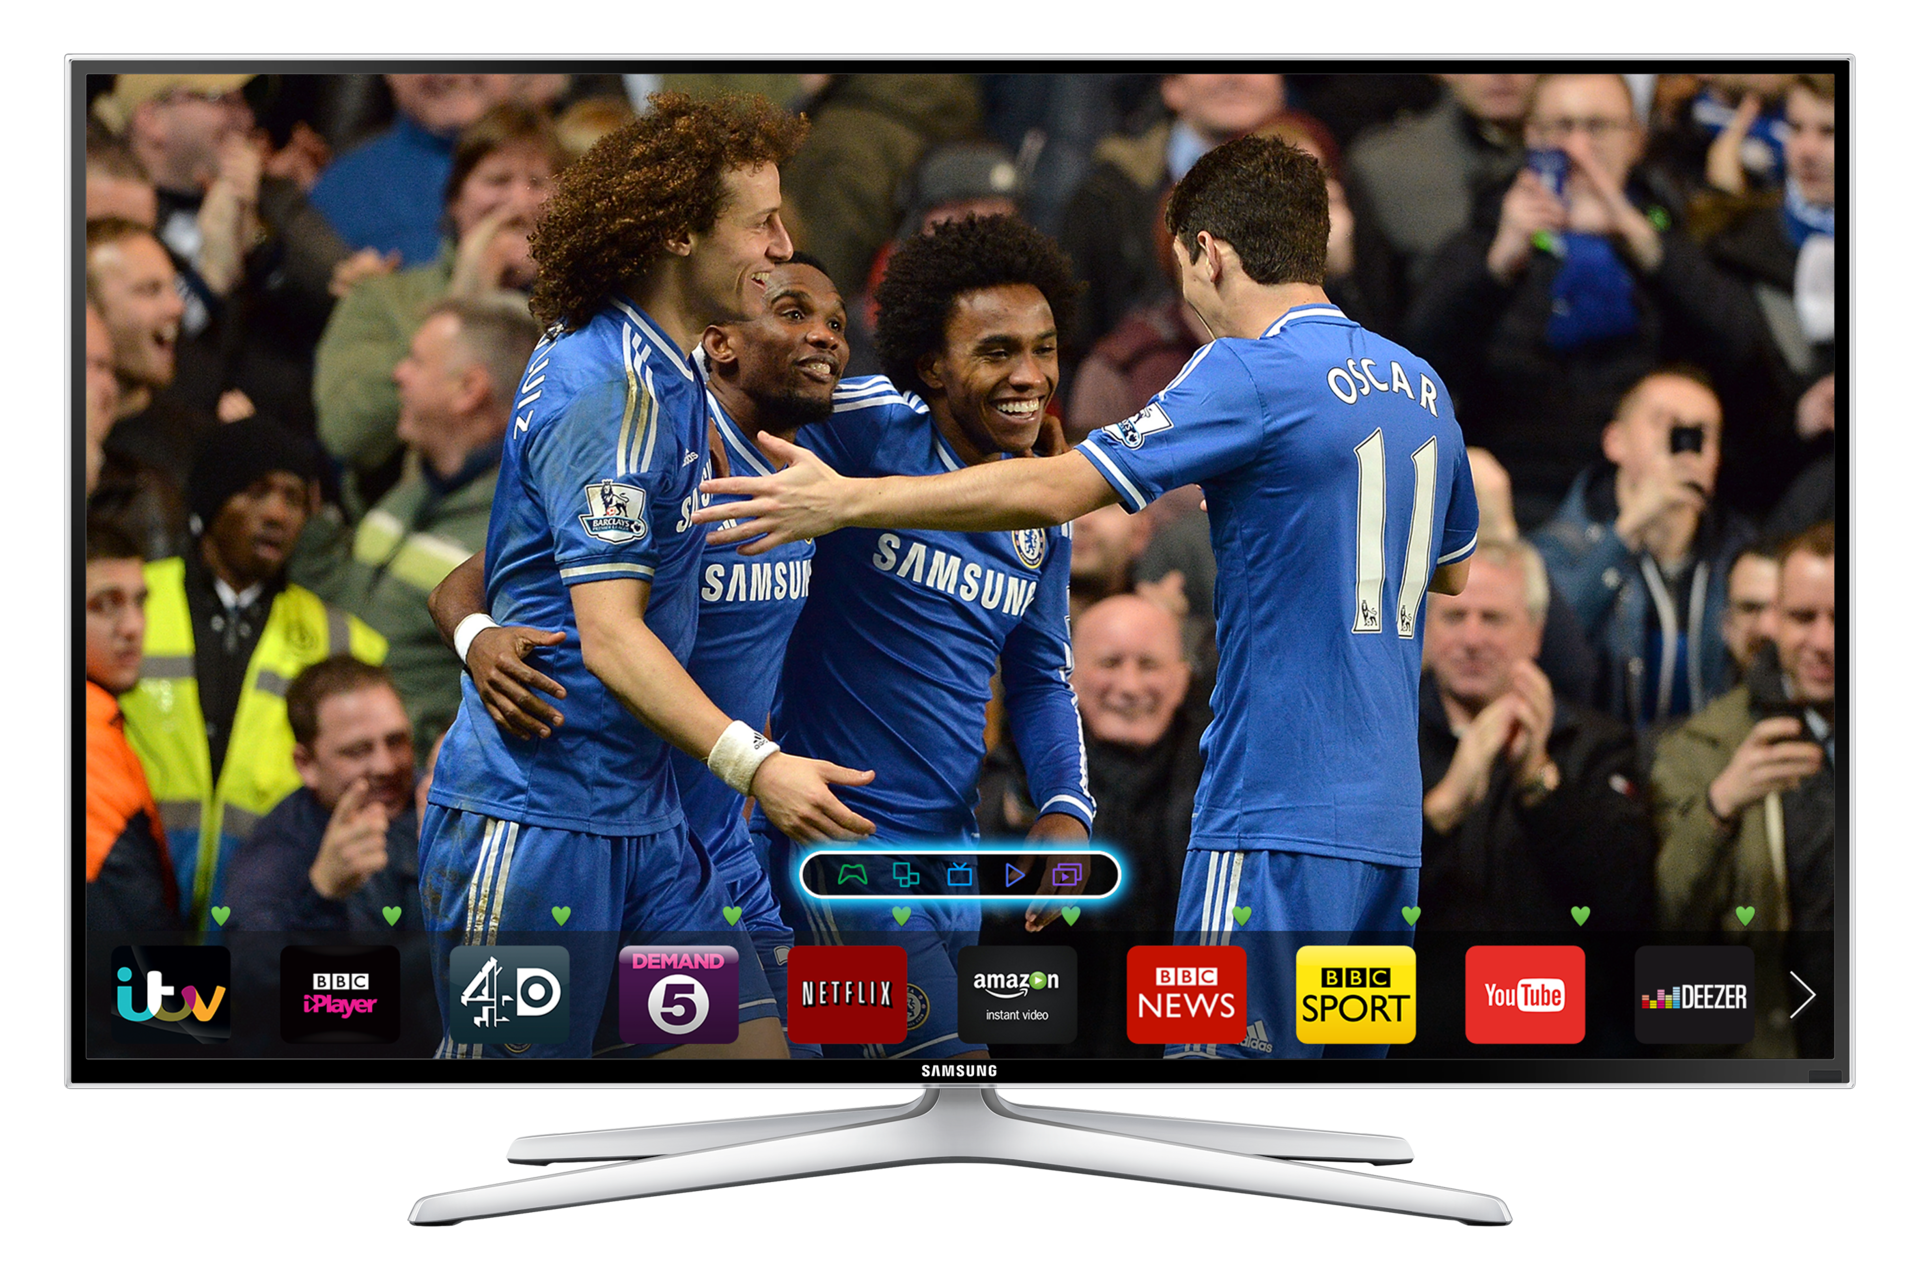 Samsung 40-Inch H6400 Series 6 Smart 3D LED TV Features